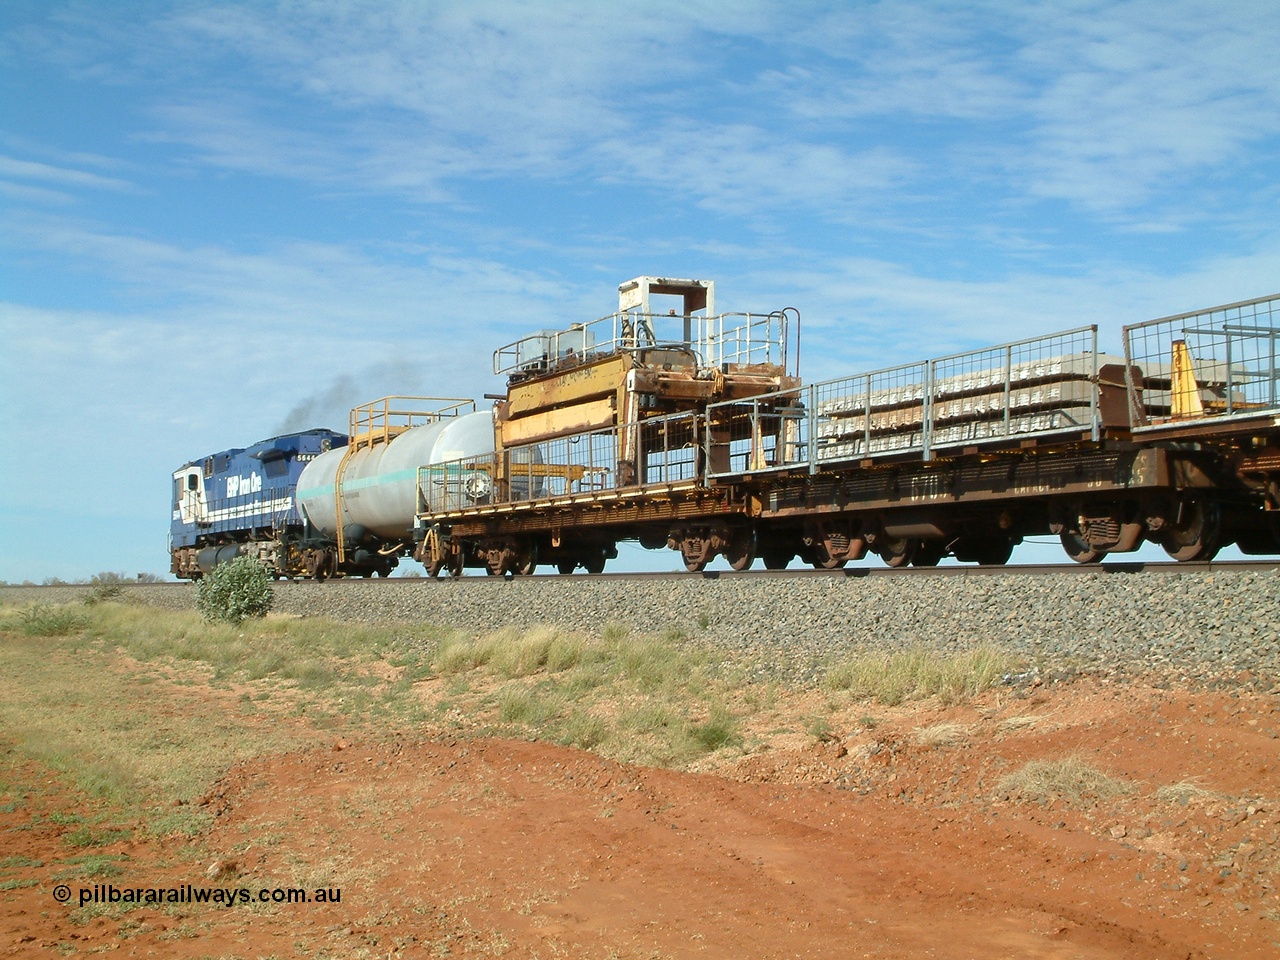 040502 085548
Mooka Siding, trailing view of the 'Pony' heading south, 50 ton waggon 6703, one of three 'special' waggons converted from Magor USA built ore waggons, loaded with concrete sleepers is closet to camera. 
Keywords: Magor-USA;BHP-pony-waggon;